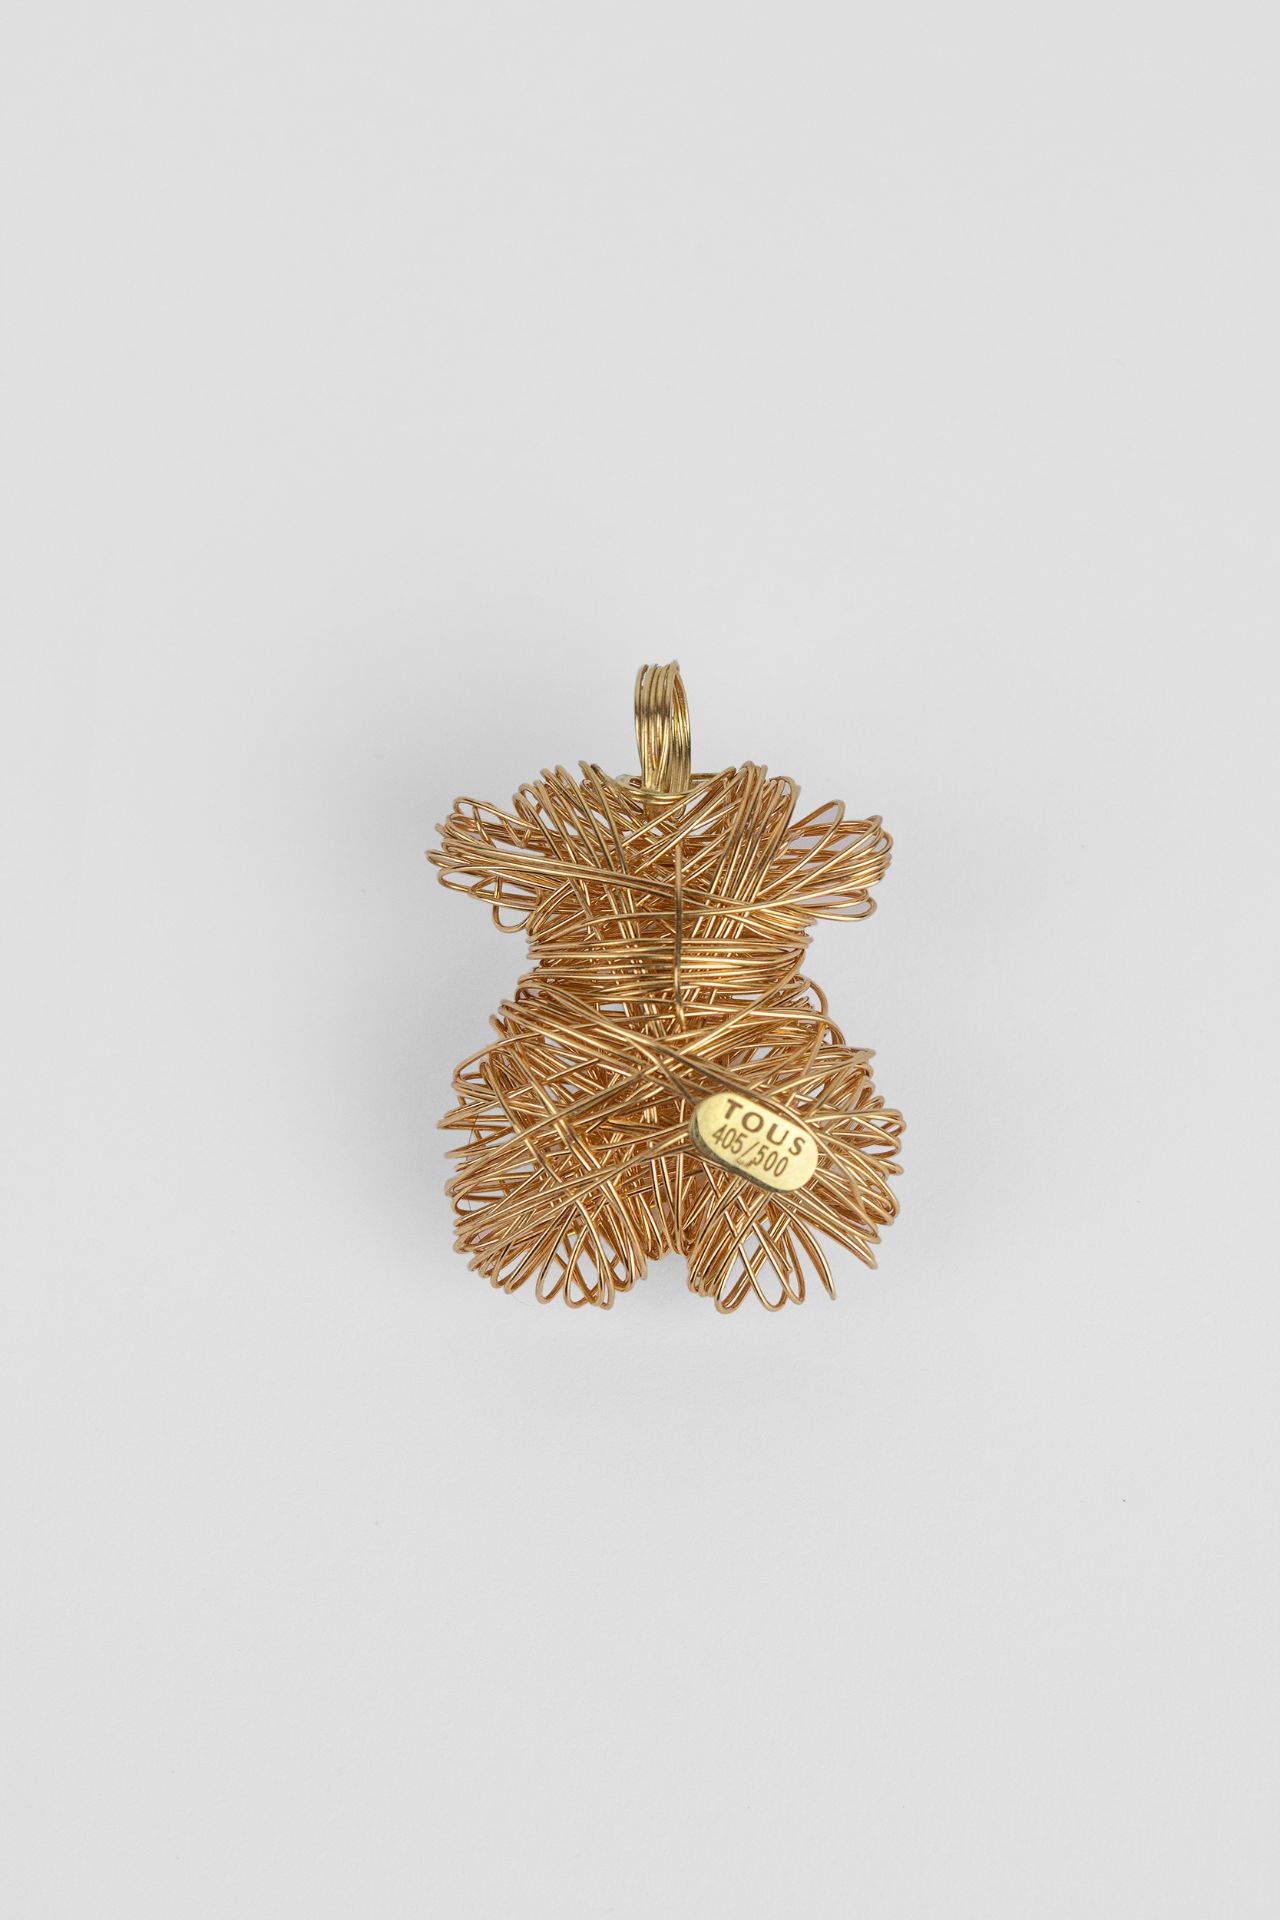 Tous. A limited edition 18k. yellow gold wire pendant - Image 2 of 2